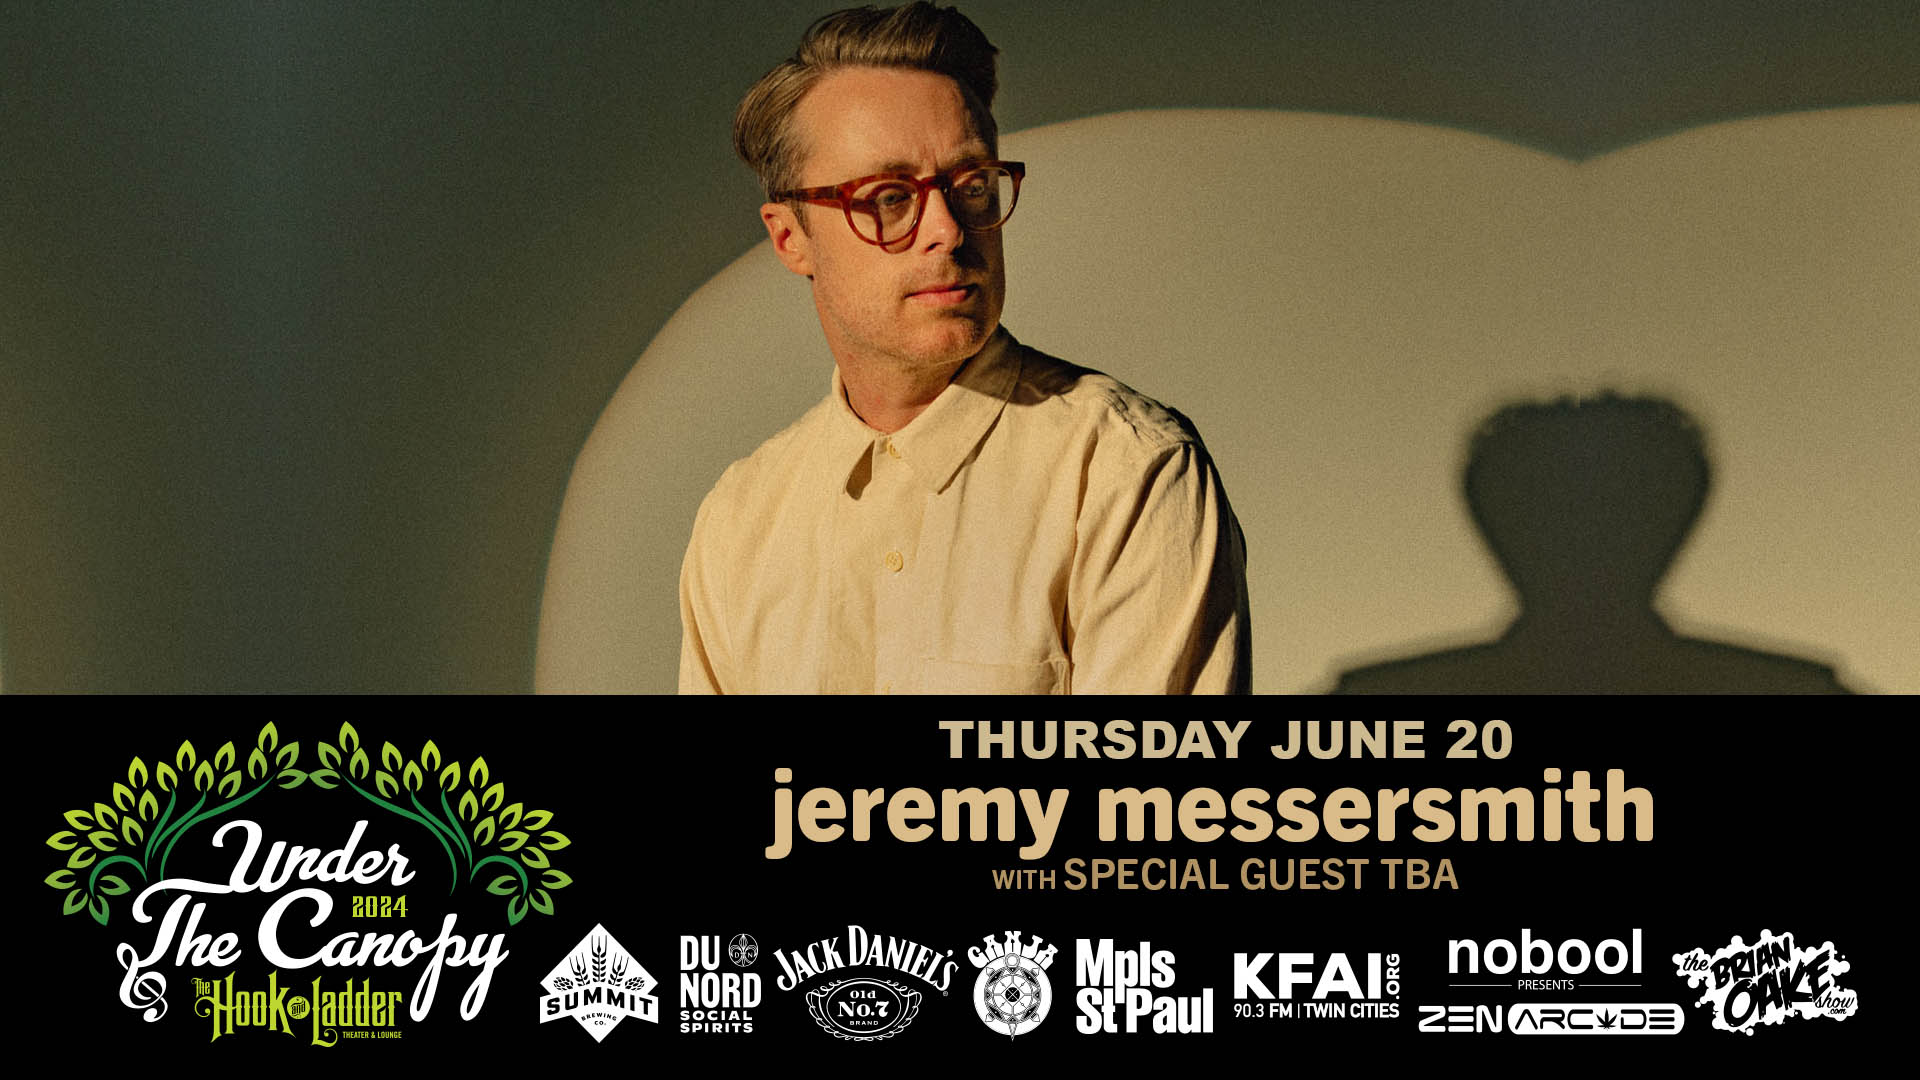 jeremy messersmith with guest TBA Thursday, June 20 Under The Canopy at The Hook and Ladder Theater "An Urban Outdoor Summer Concert Series" Doors 6:00pm :: Music 7:00pm :: 21+ Reserved Seats: $36 GA: $24 ADV / $30 DOS